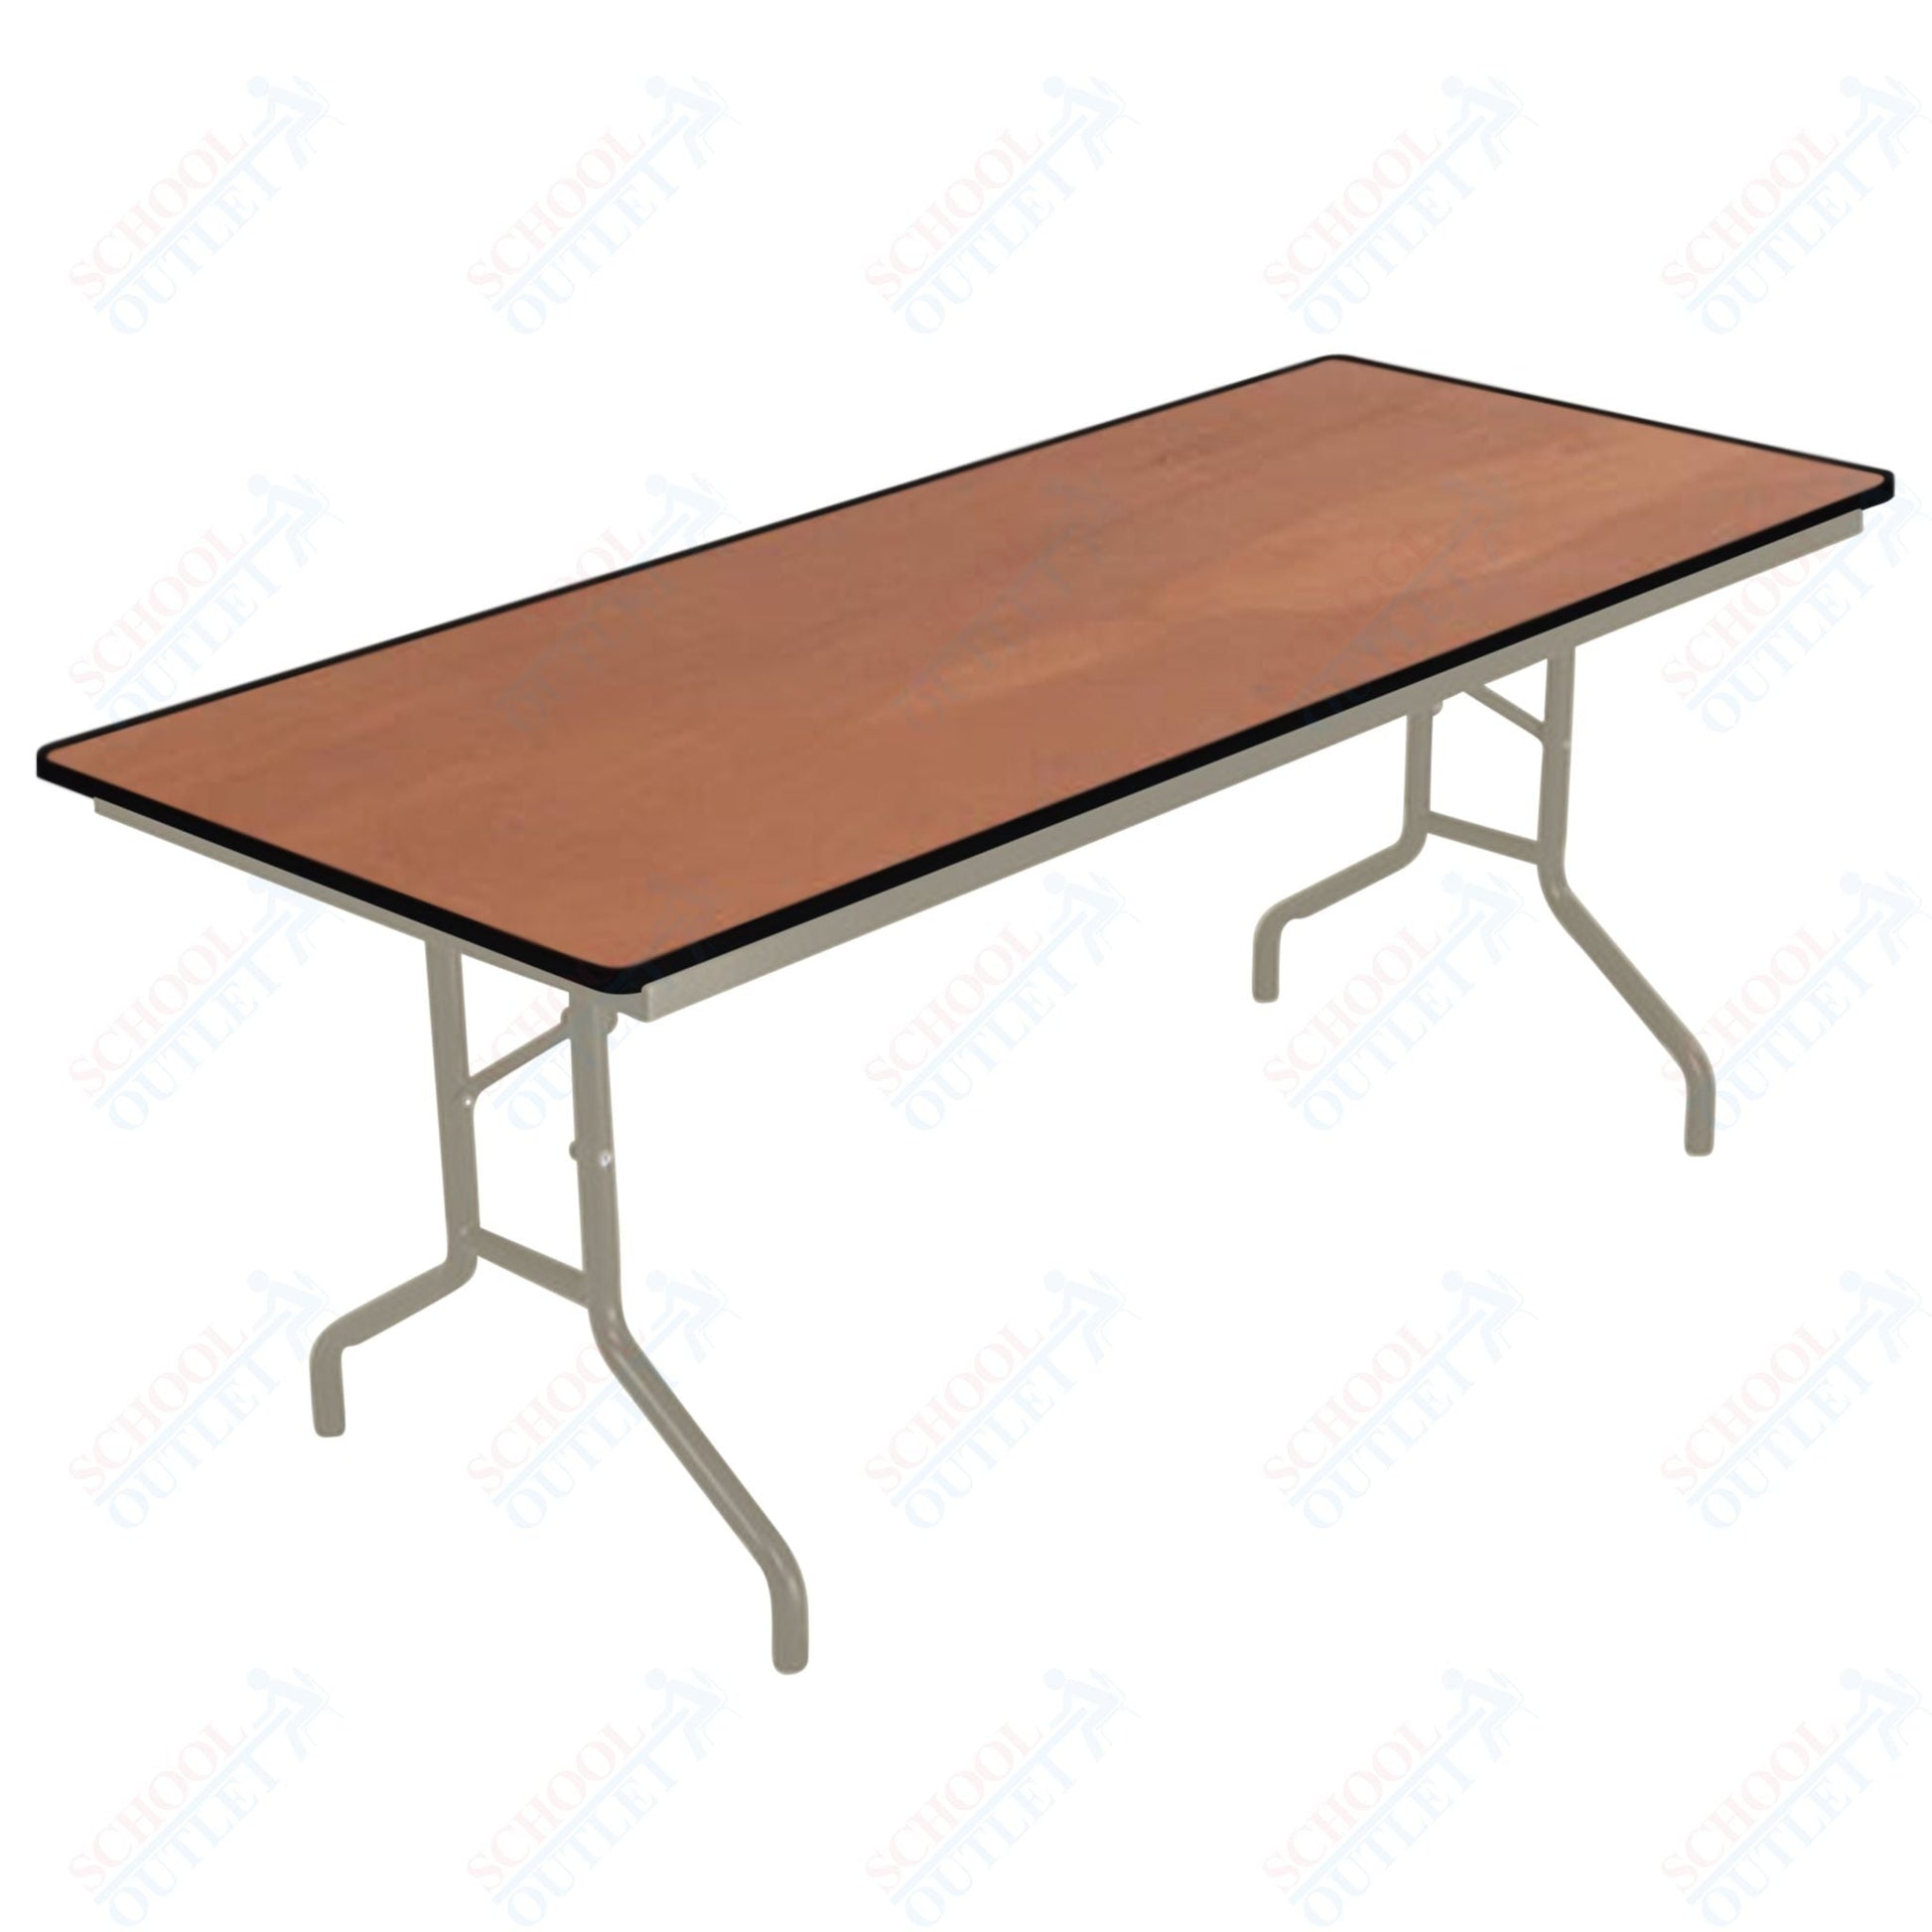 AmTab Folding Table - Plywood Stained and Sealed - Vinyl T-Molding Edge - 18"W x 60"L x 29"H (AmTab AMT-185PM) - SchoolOutlet